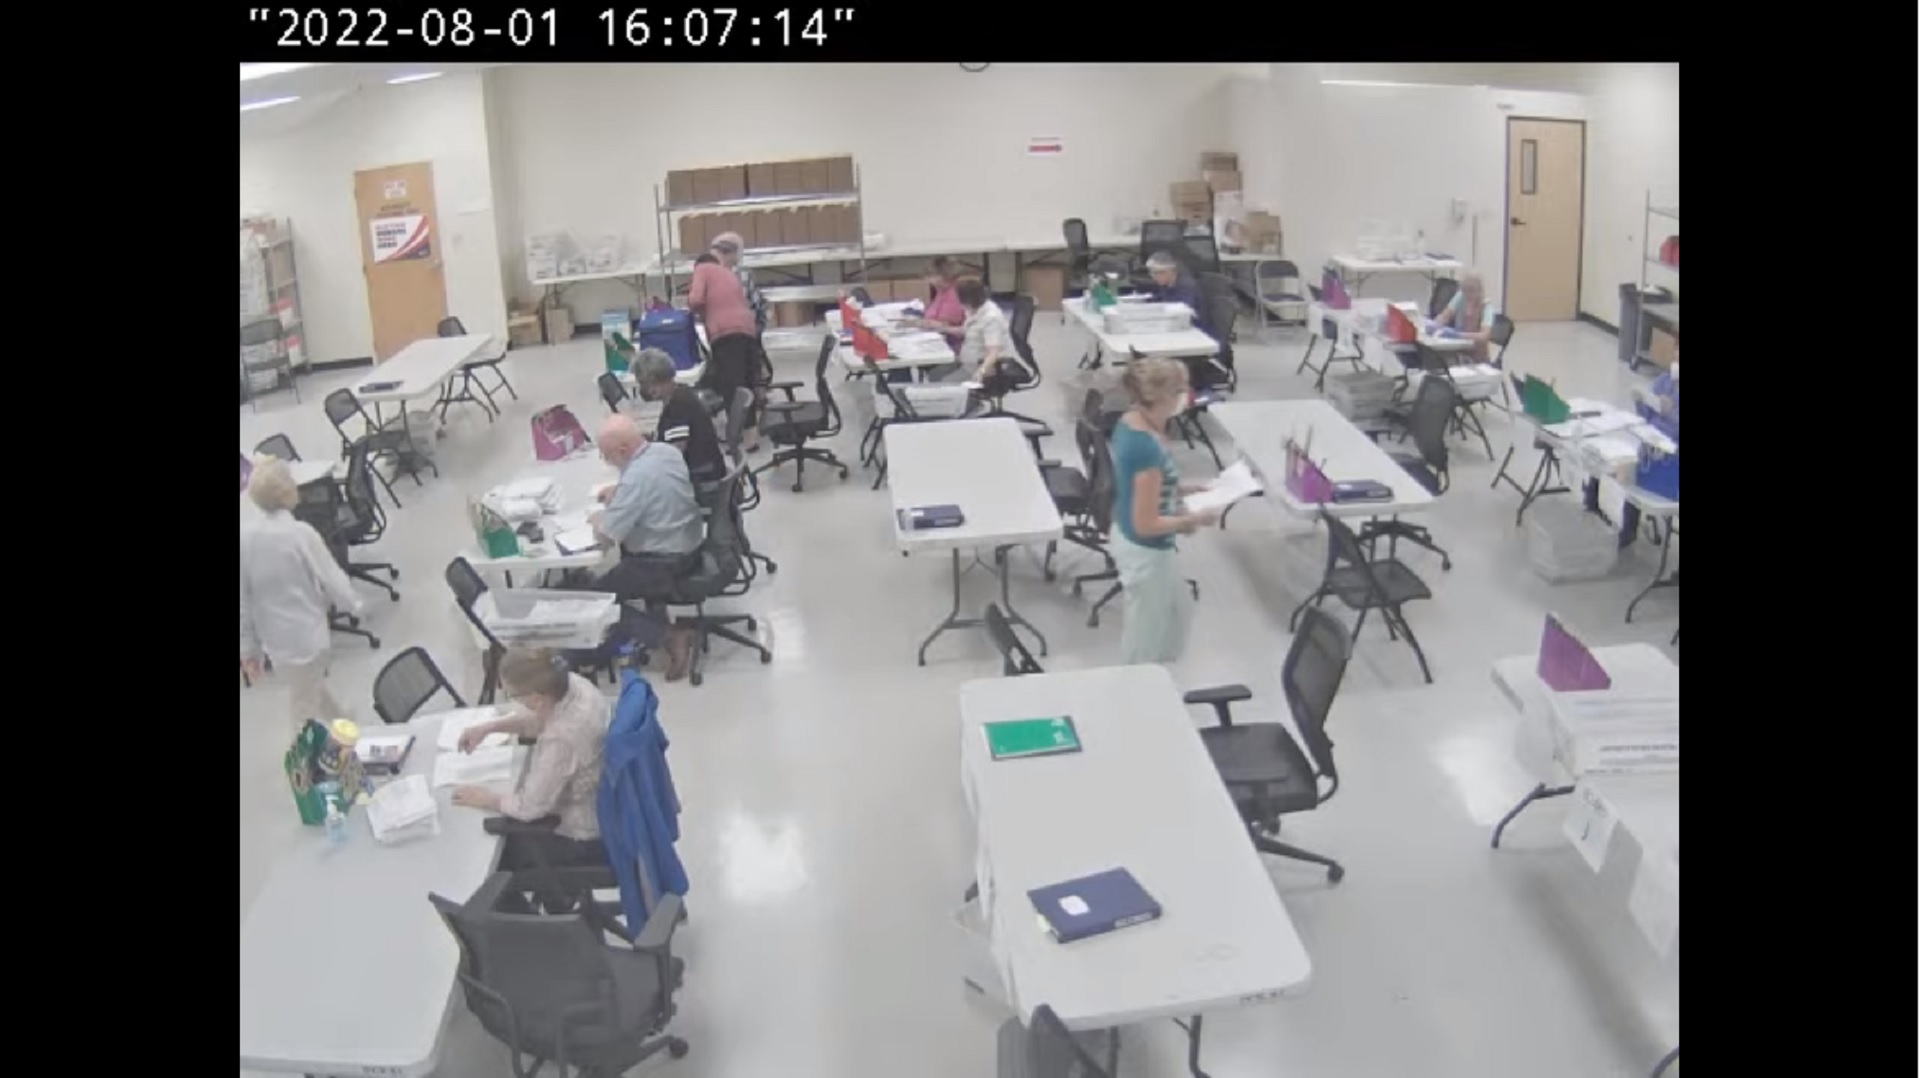 Workers inside Pima County's ballot tabulation room are shown in this screen capture from August 1, 2022, one day before the Arizona primary election.